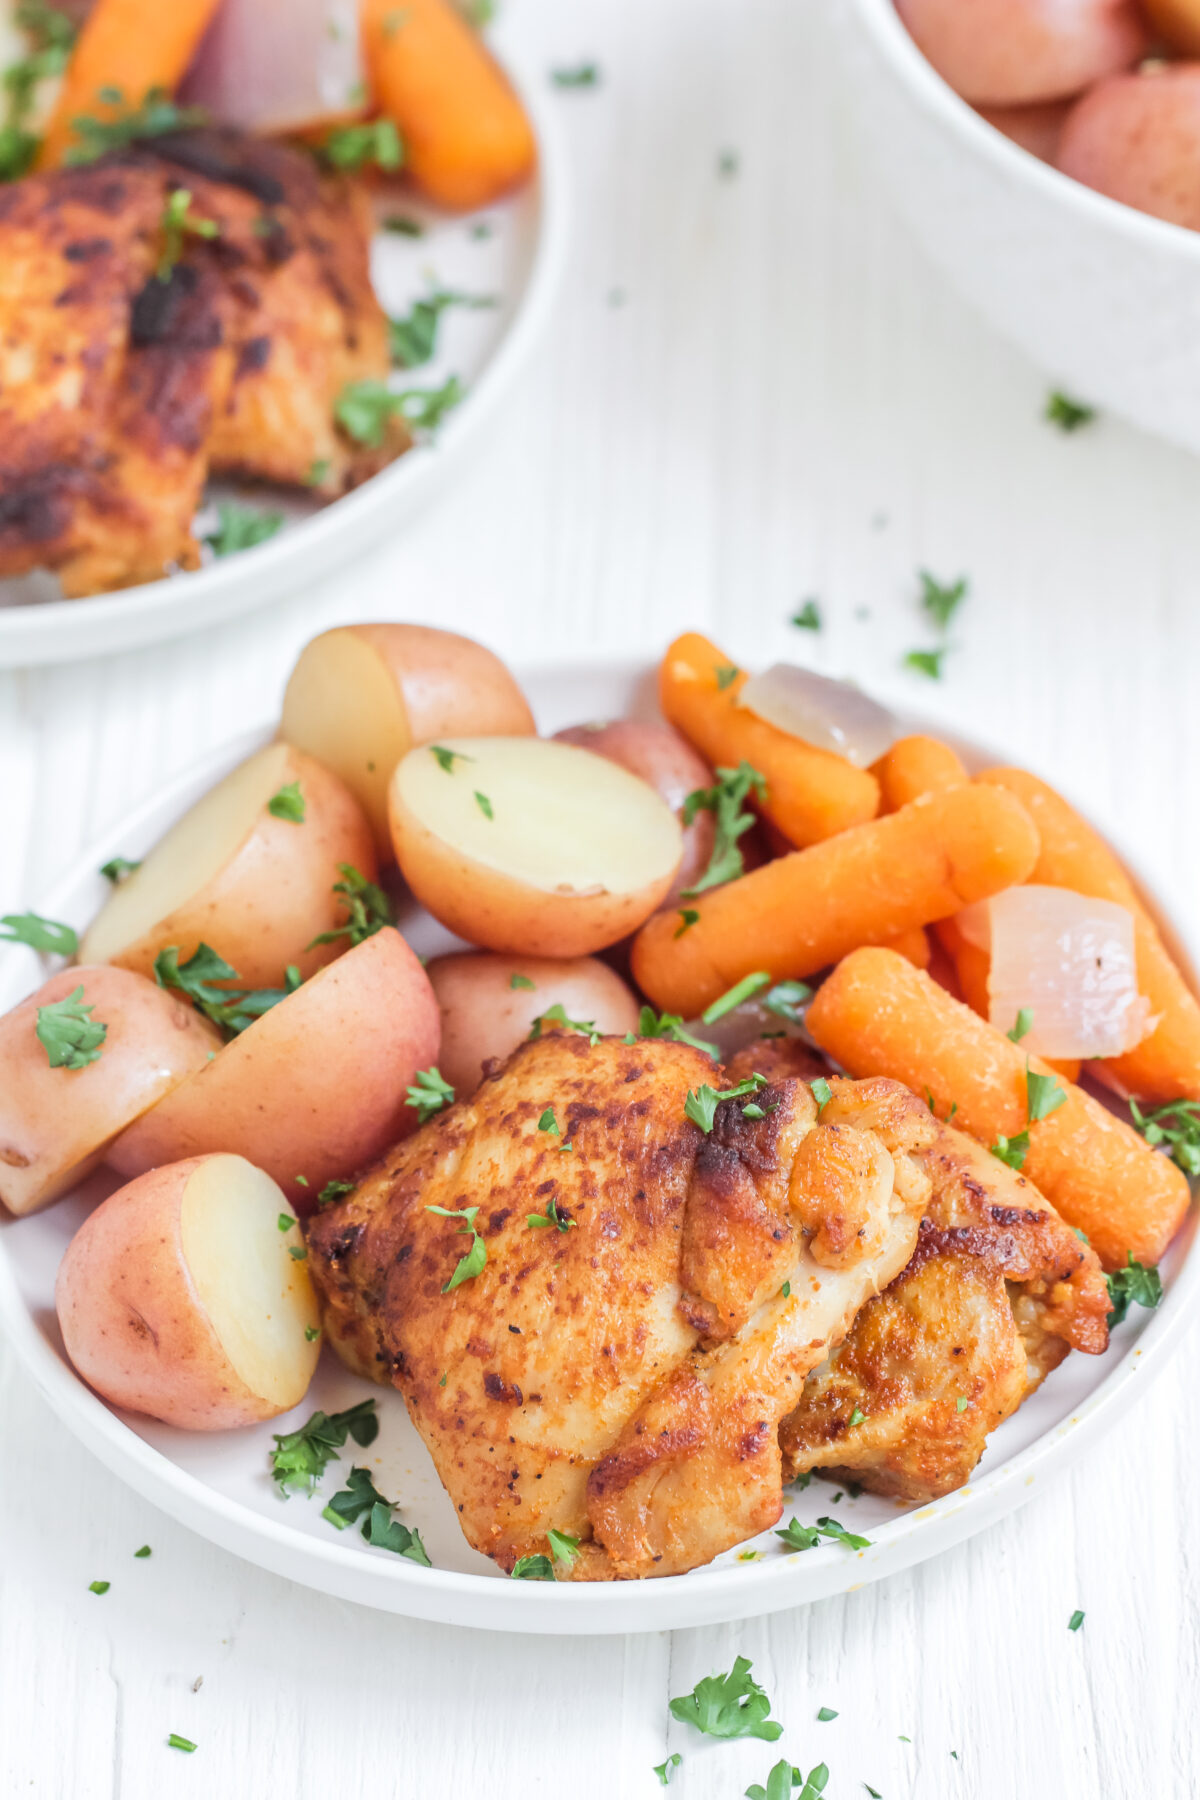 This easy slow cooker chicken thighs and potatoes recipe is perfect for a busy family. With carrots, it's a crock pot meal that's complete!